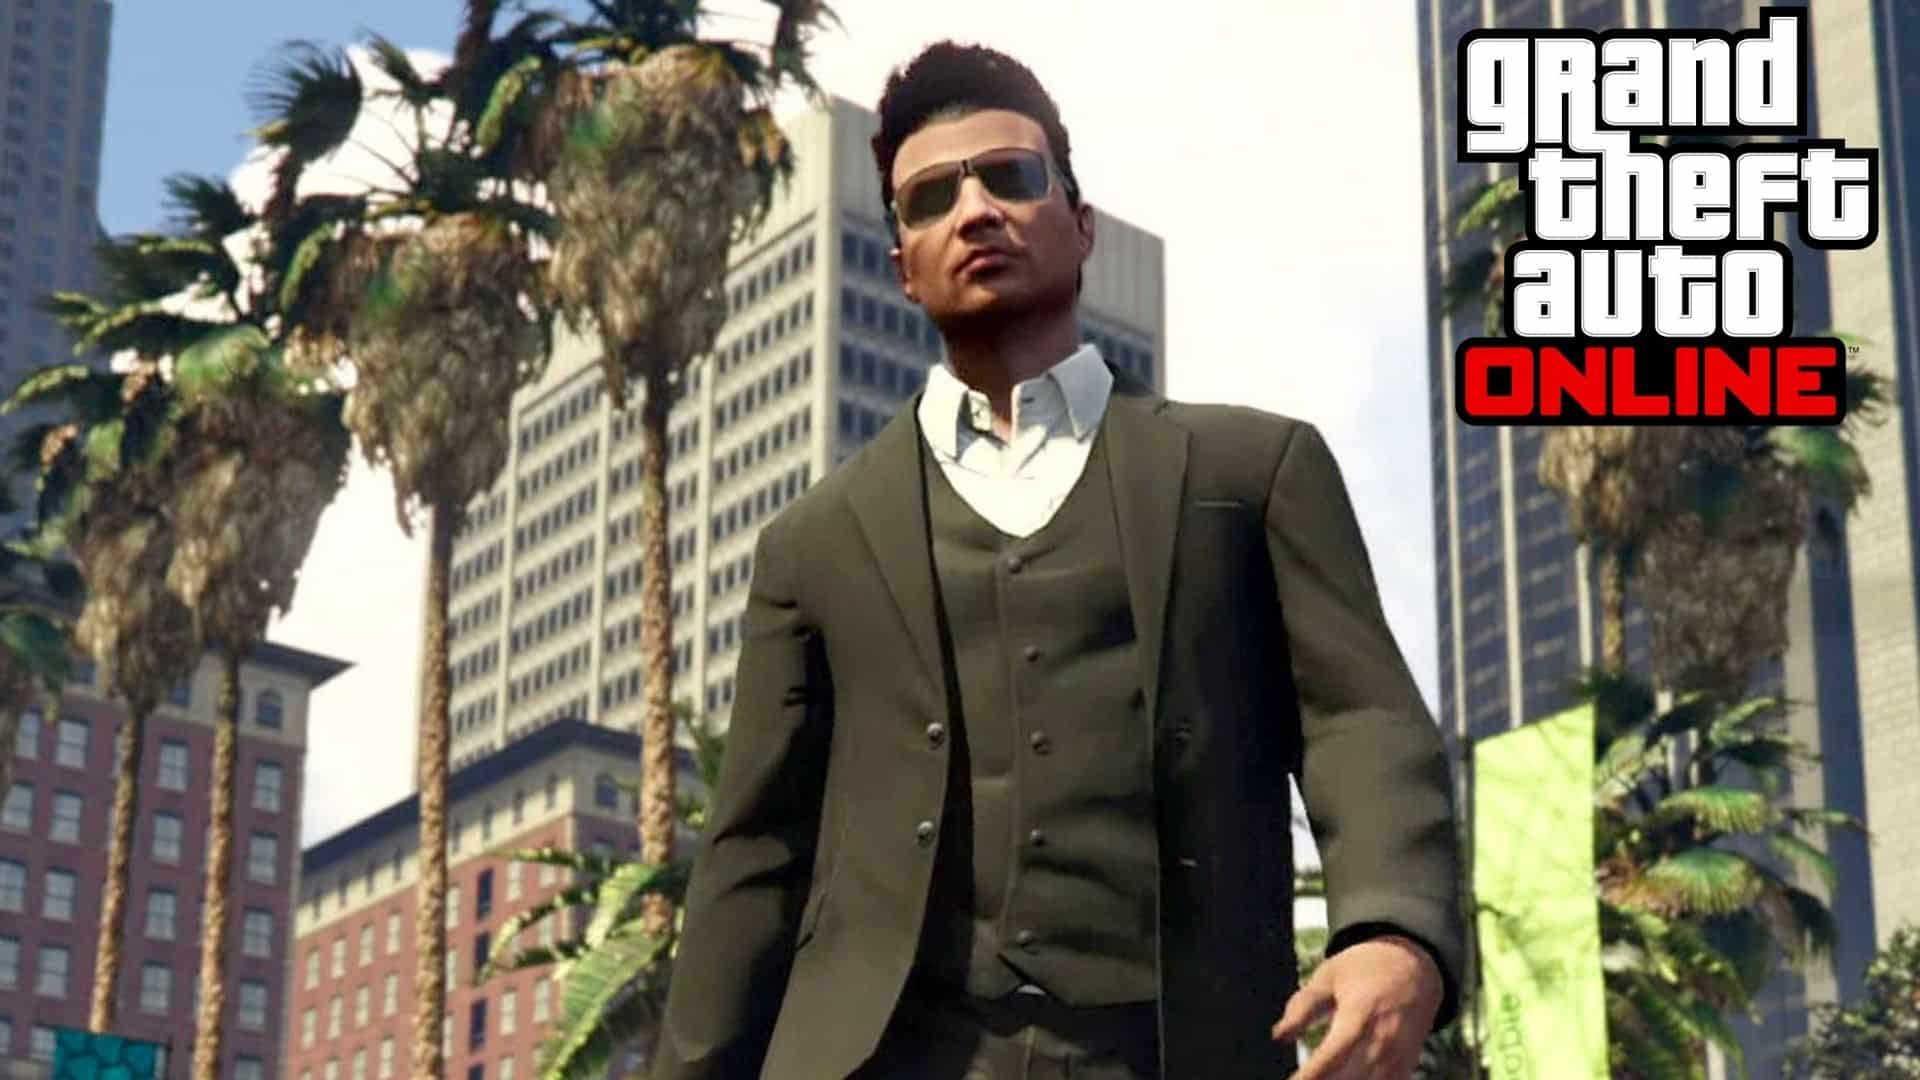 GTA Online character in suit walking looking at camera